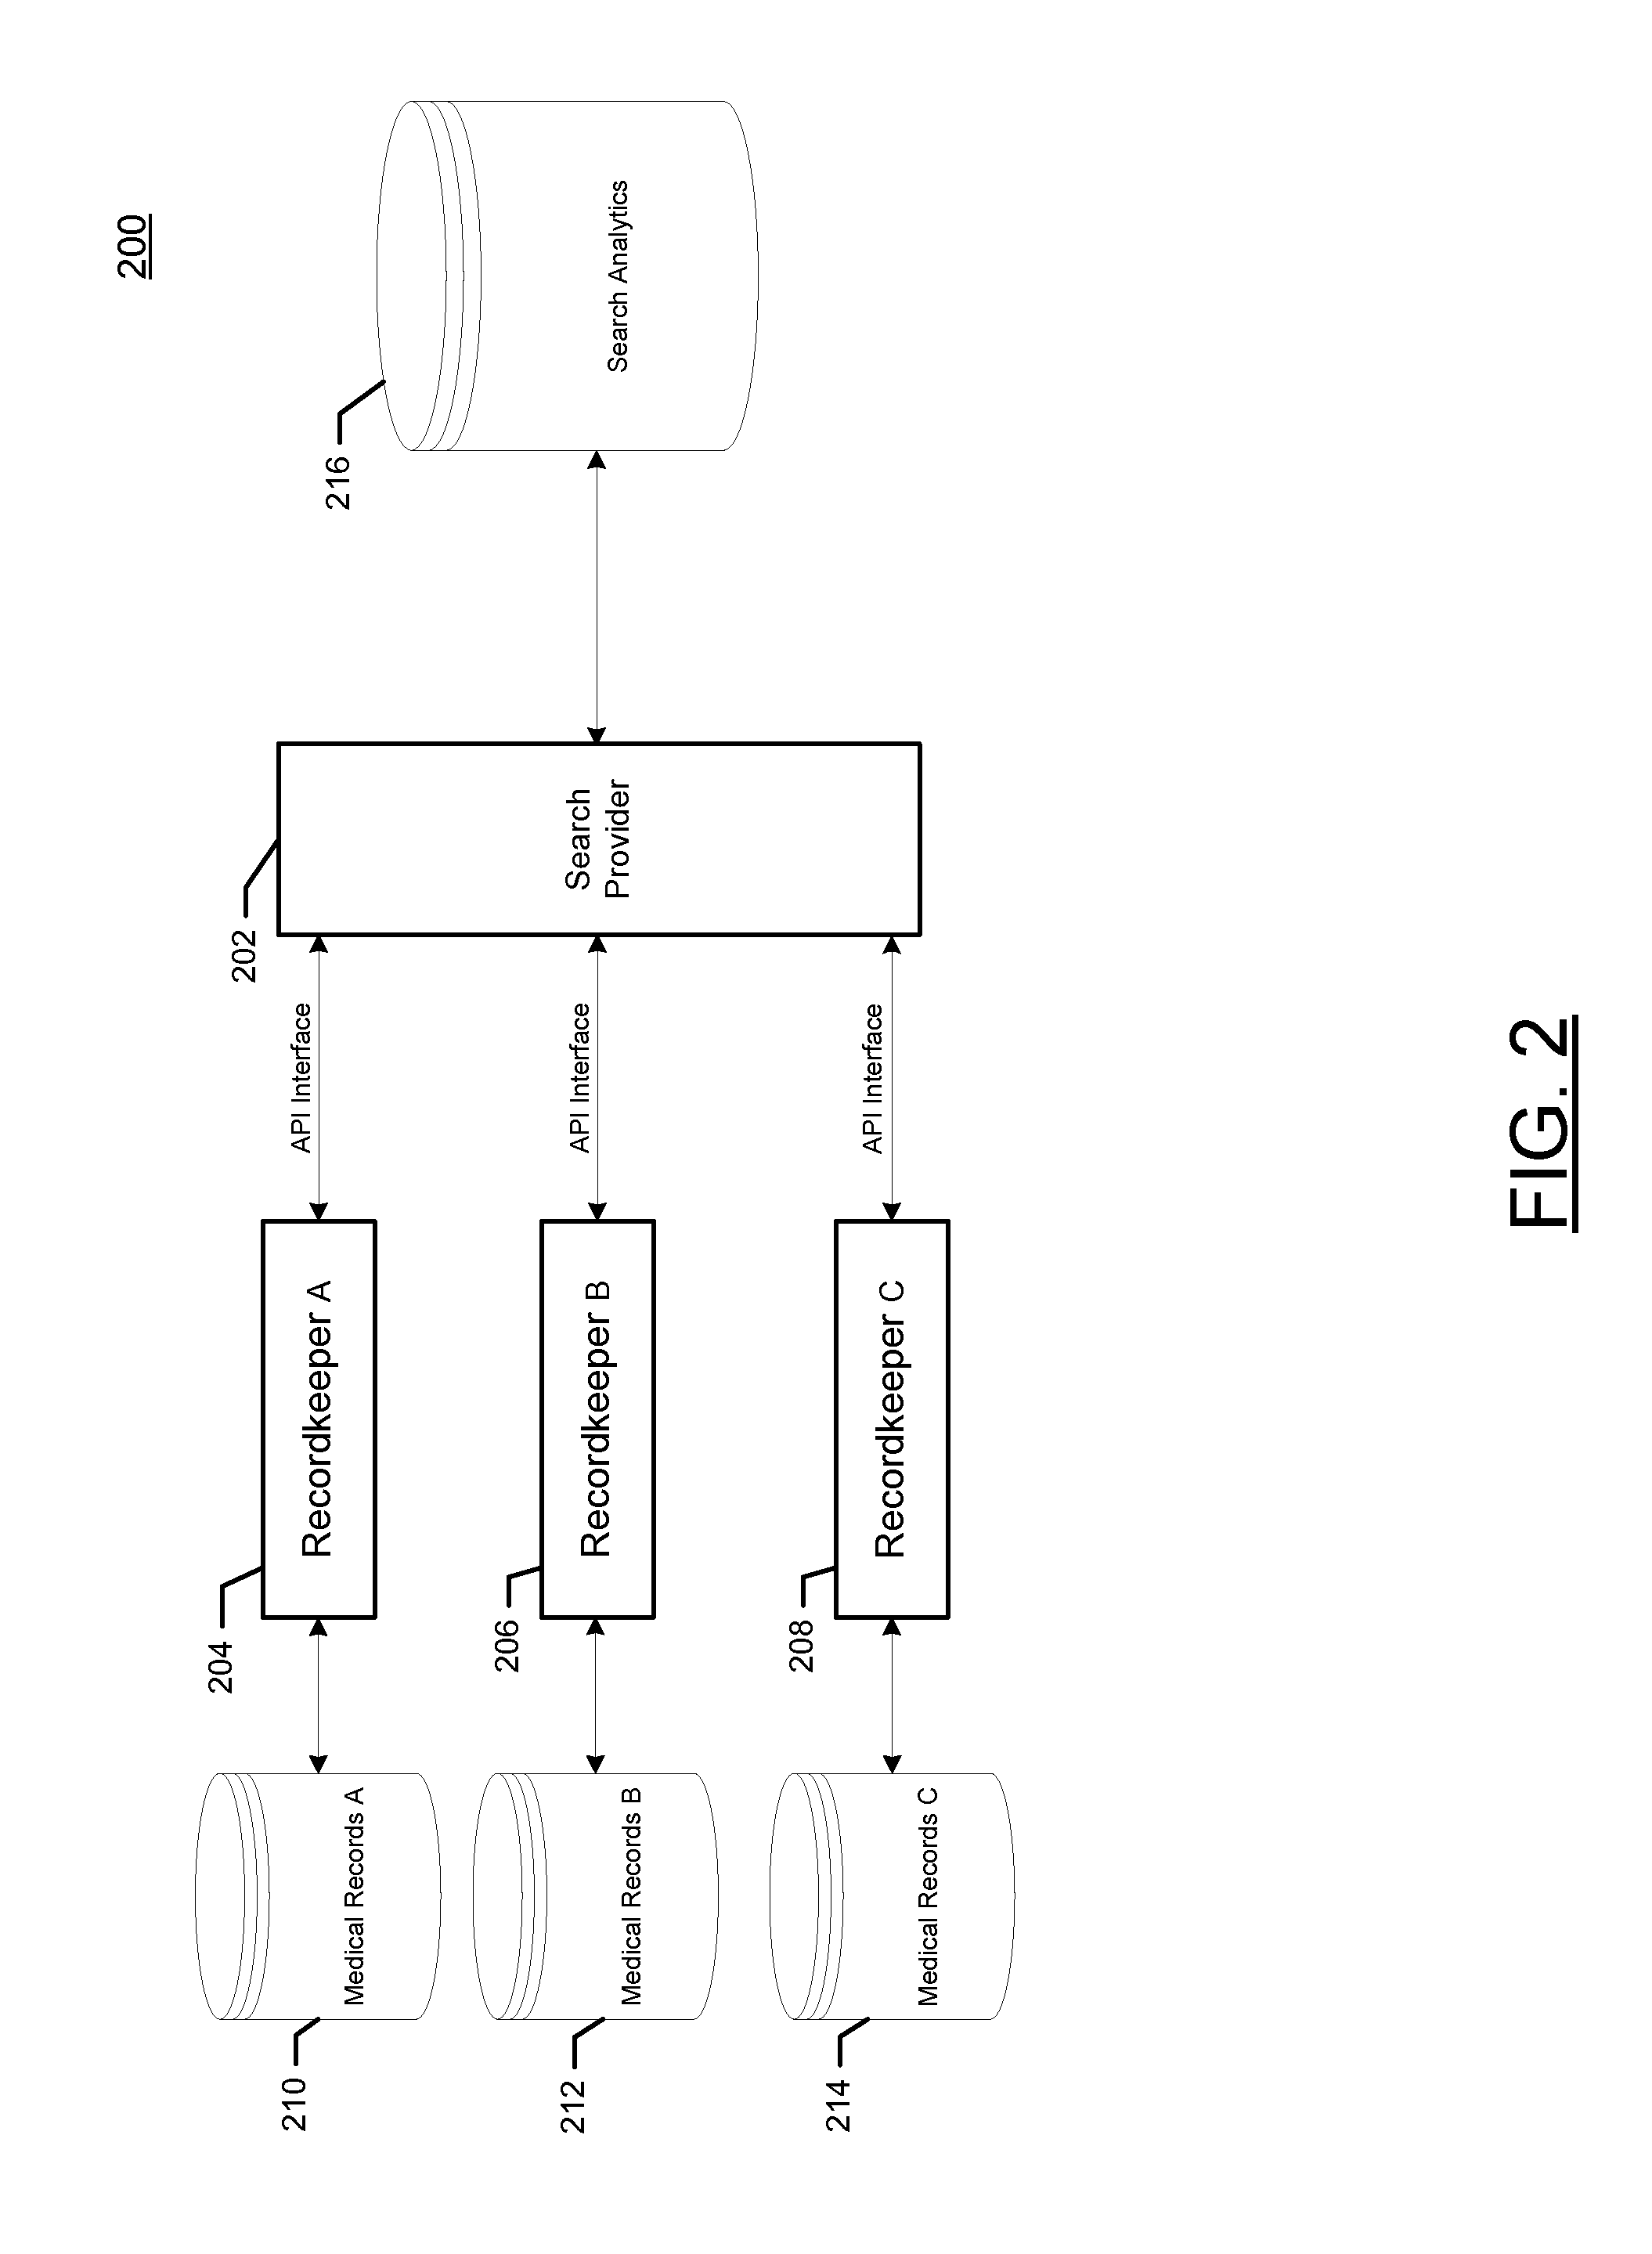 Method and apparatus for providing improved searching of medical records